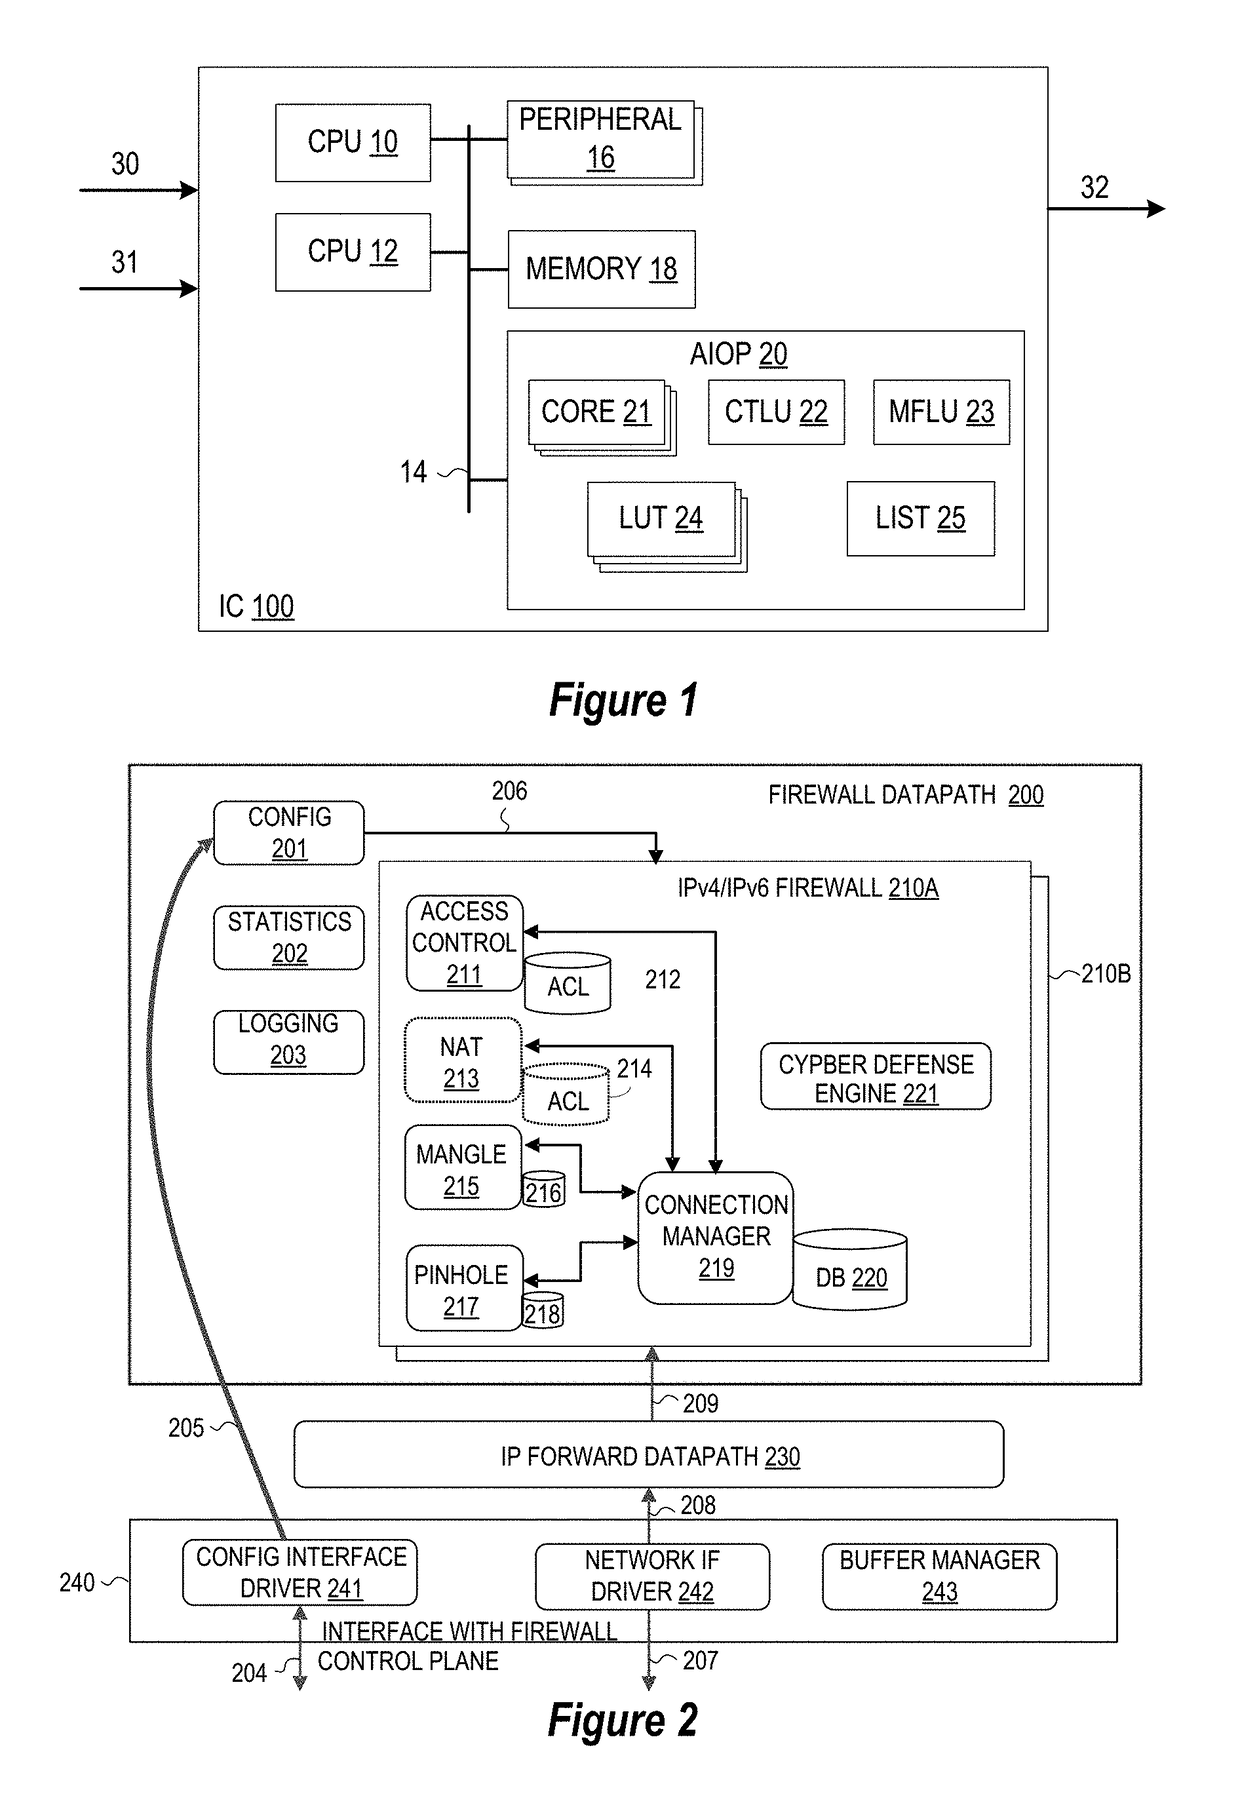 Method and Apparatus for Speeding Up ACL Rule Lookups That Include TCP/UDP Port Ranges in the Rules